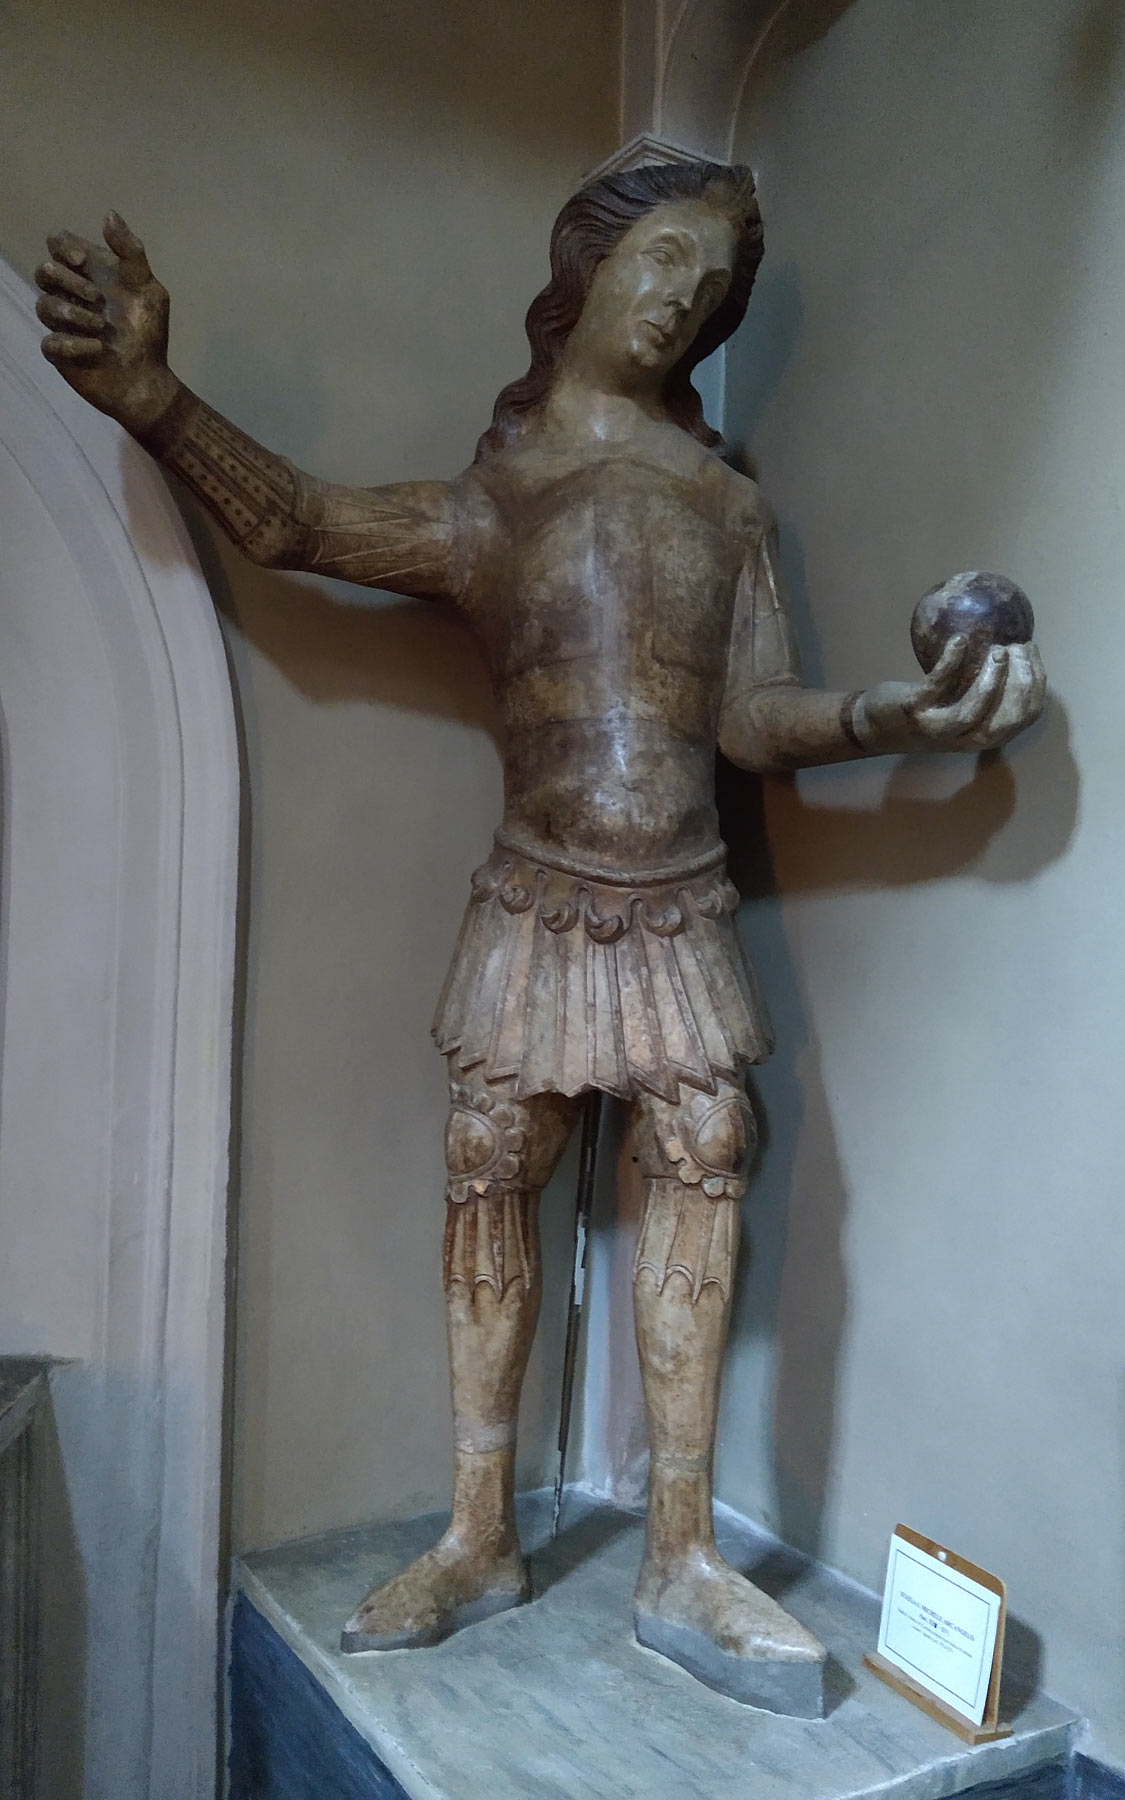 The 16th century marble statue of St. Michael